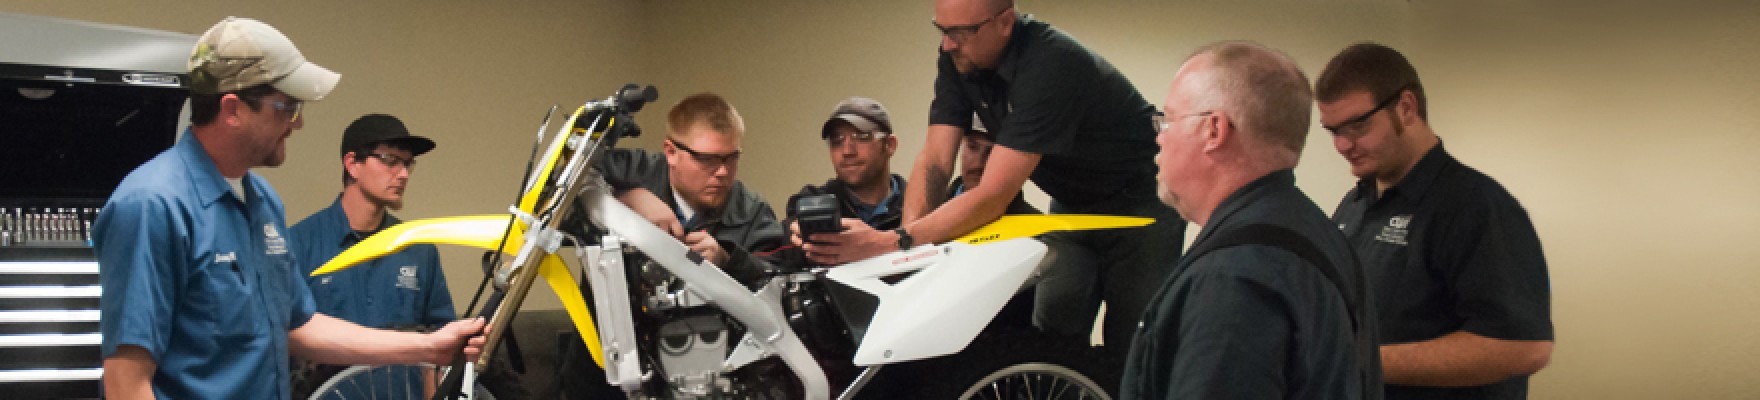 Students and instructors around a yellow and white motorcycle in a classroom.